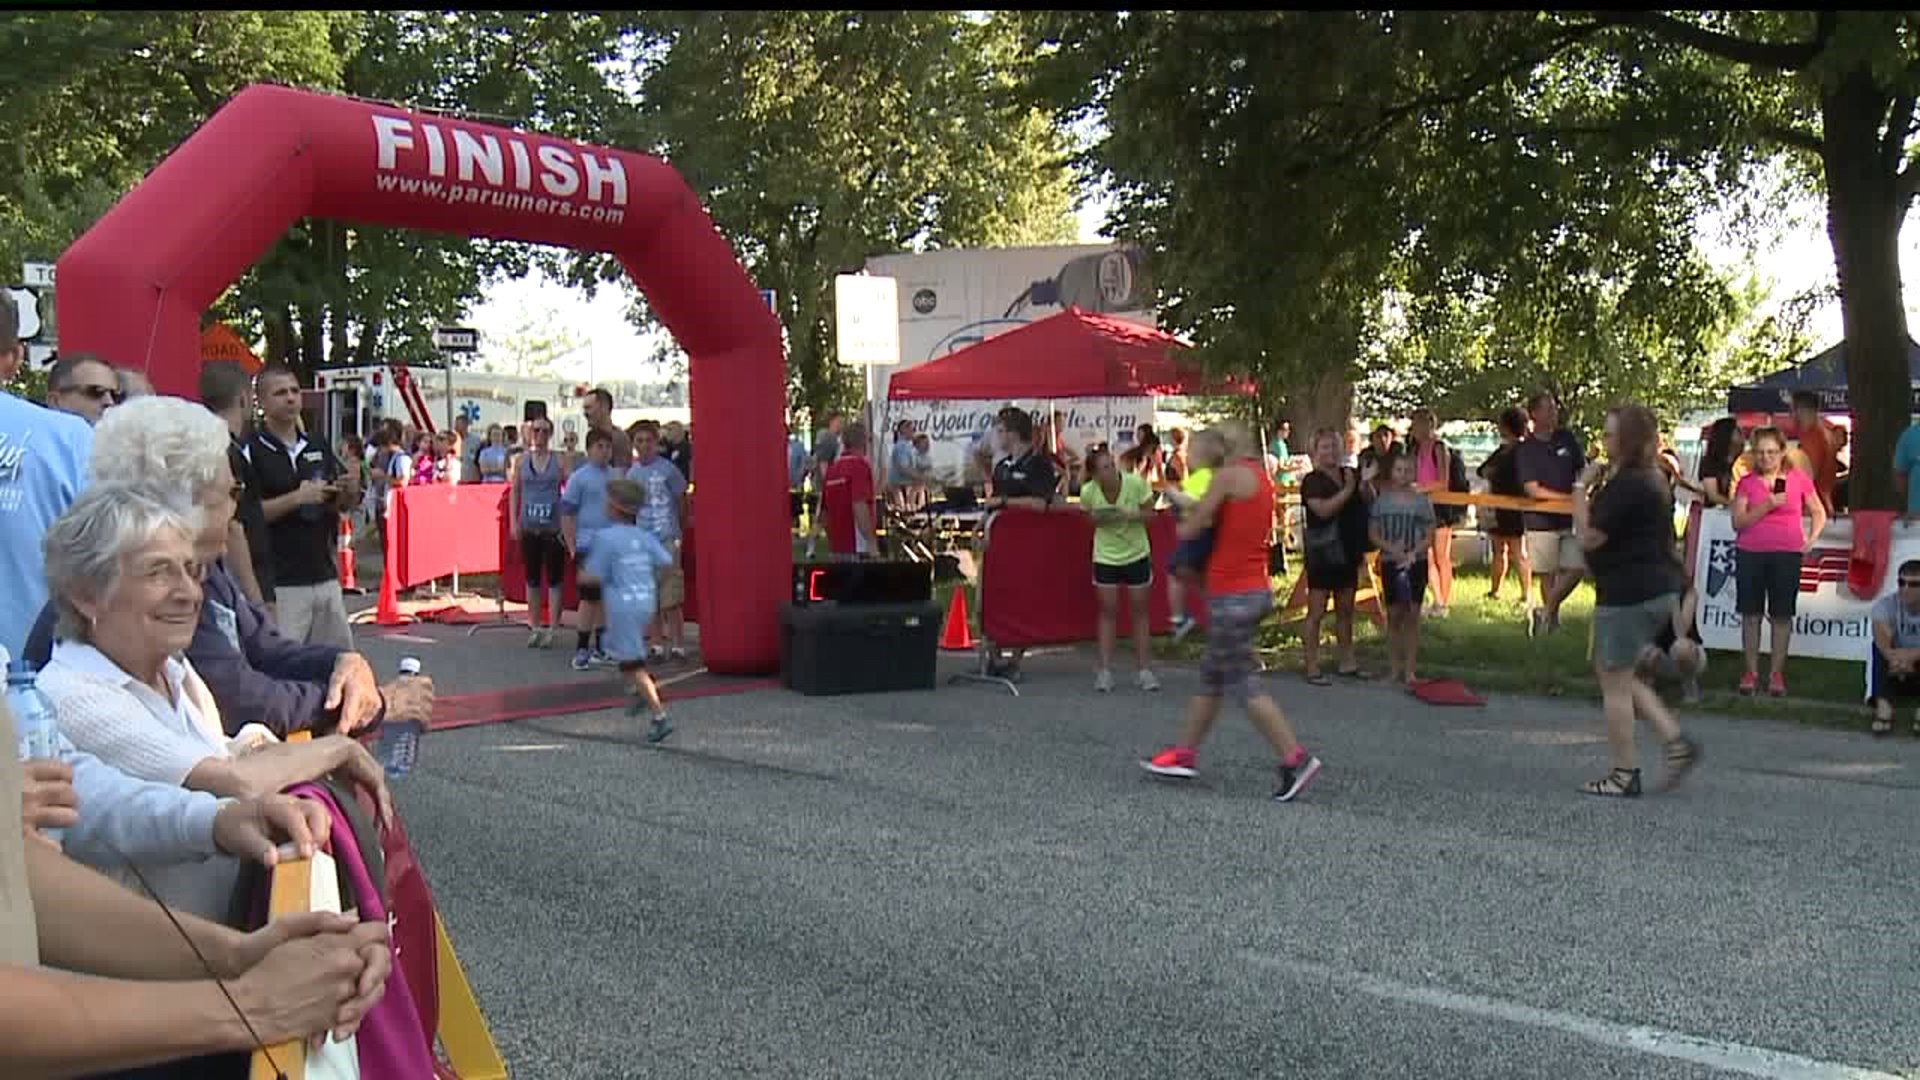 Runners are lacing up their sneakers and getting ready for the Harrisburg Mile tonight